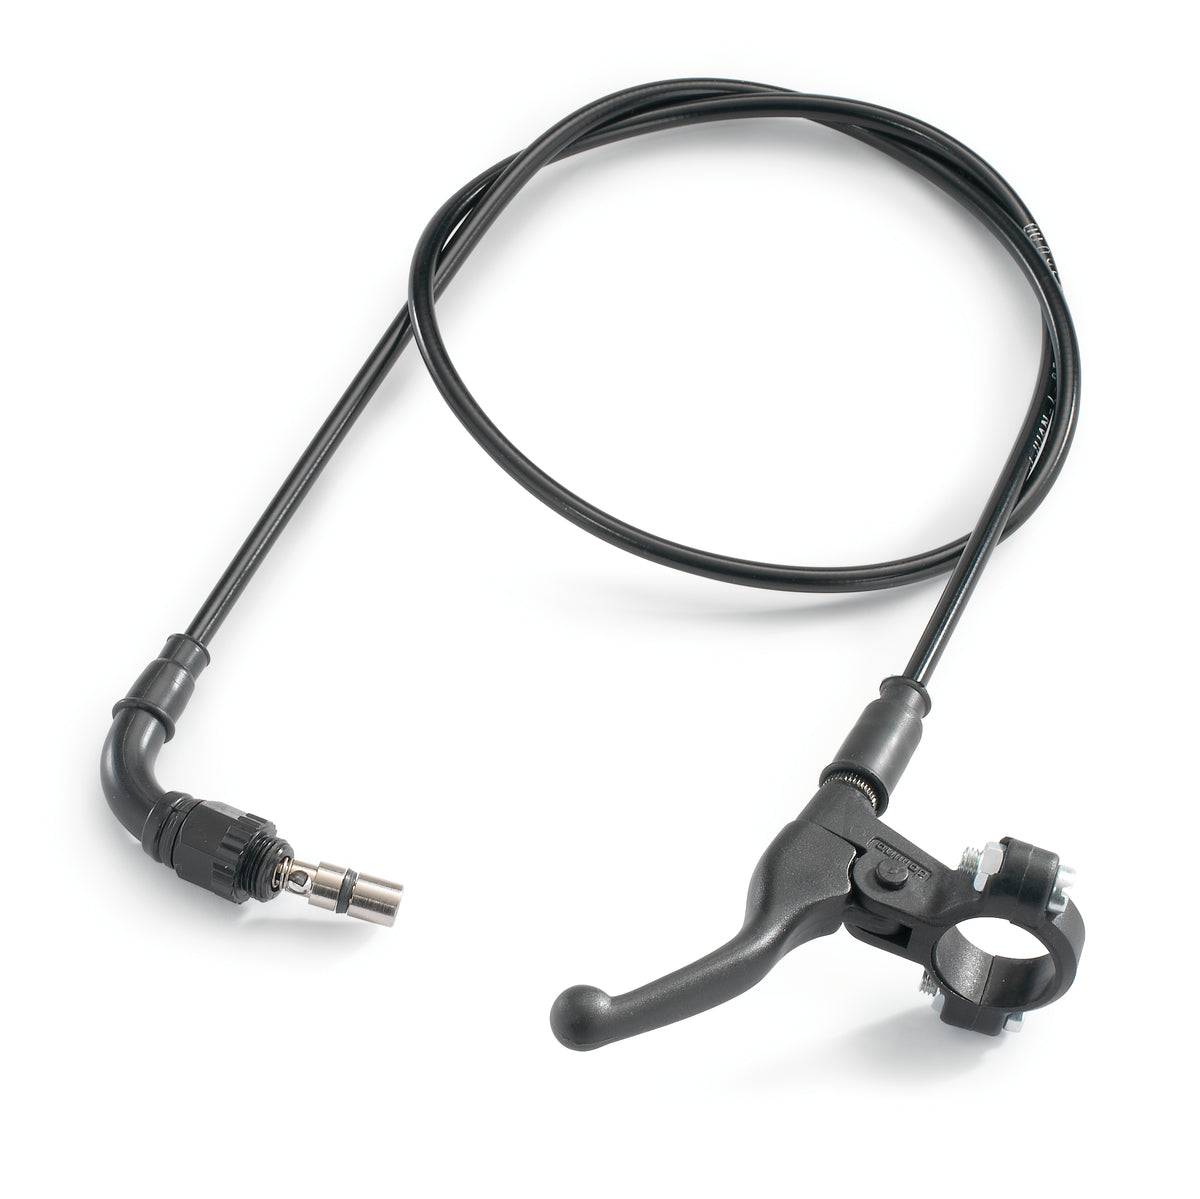 Hot-start control cable